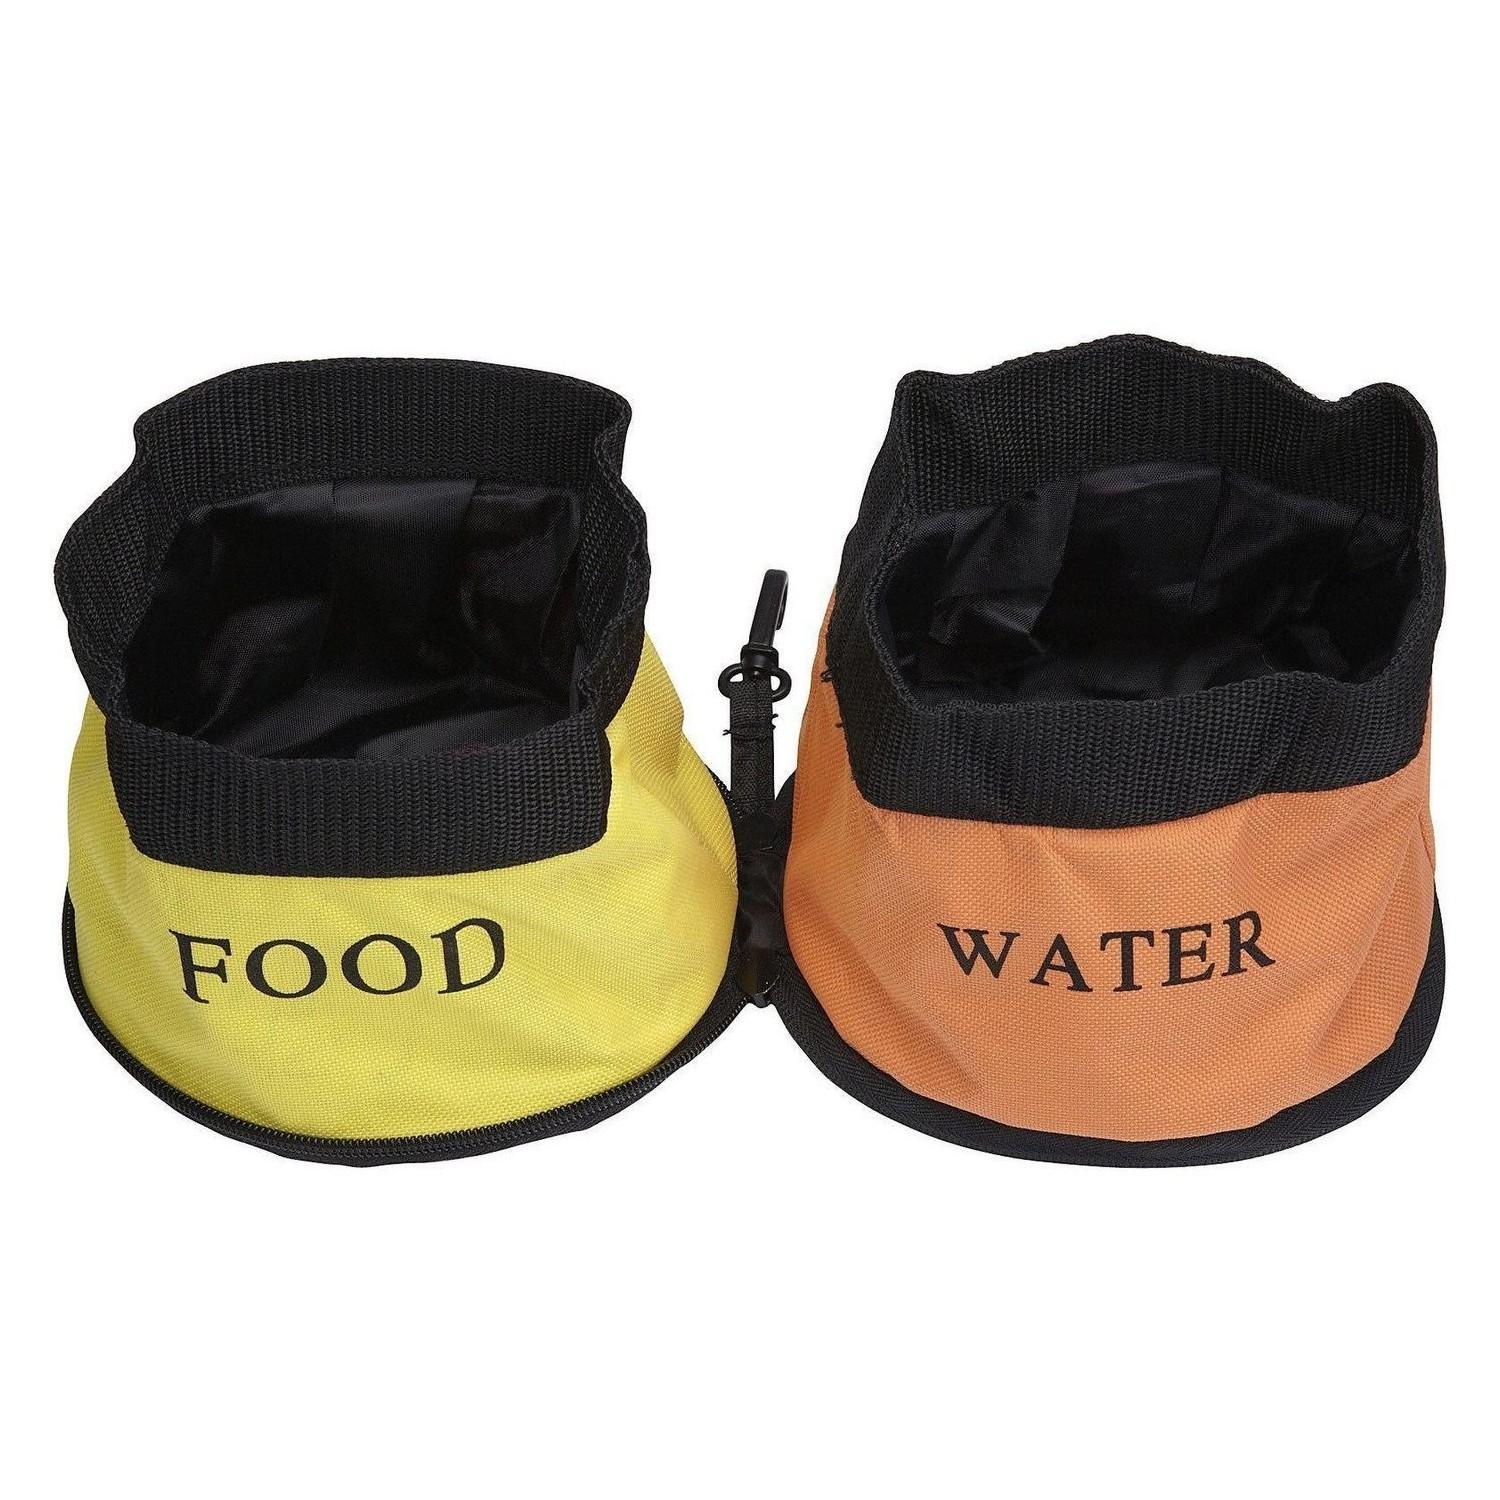 Pet Life Dual Folding Food and Water Collapsible Cat and Dog Bowl - Red